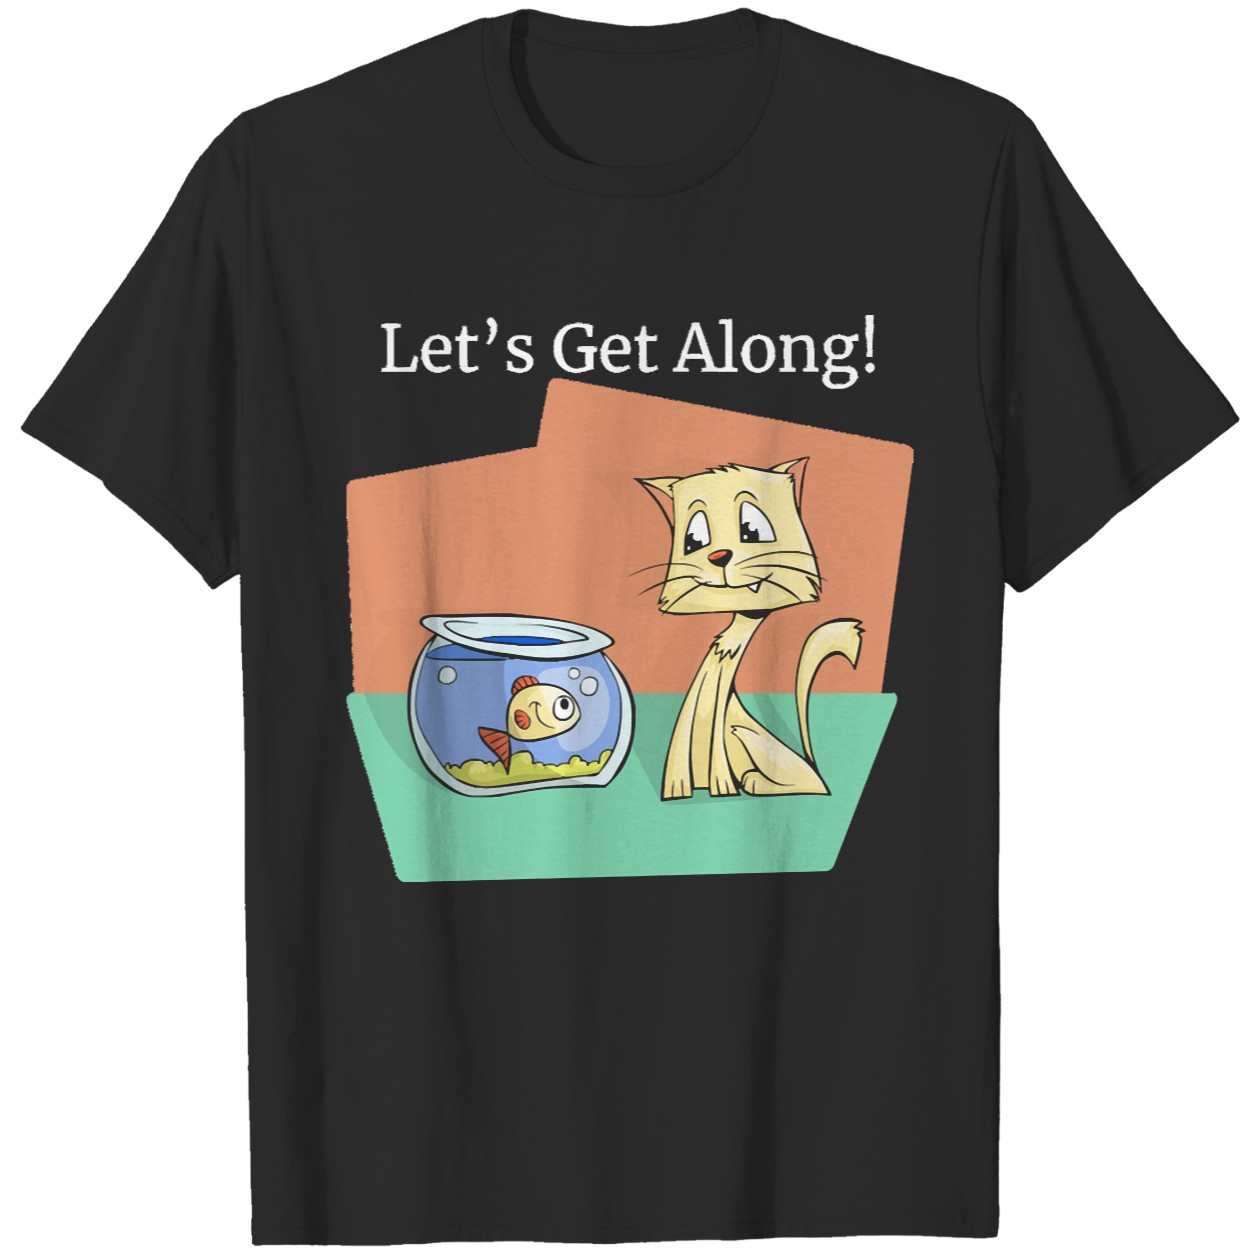 Get Along Cat and Fish Graphic Tee DZT